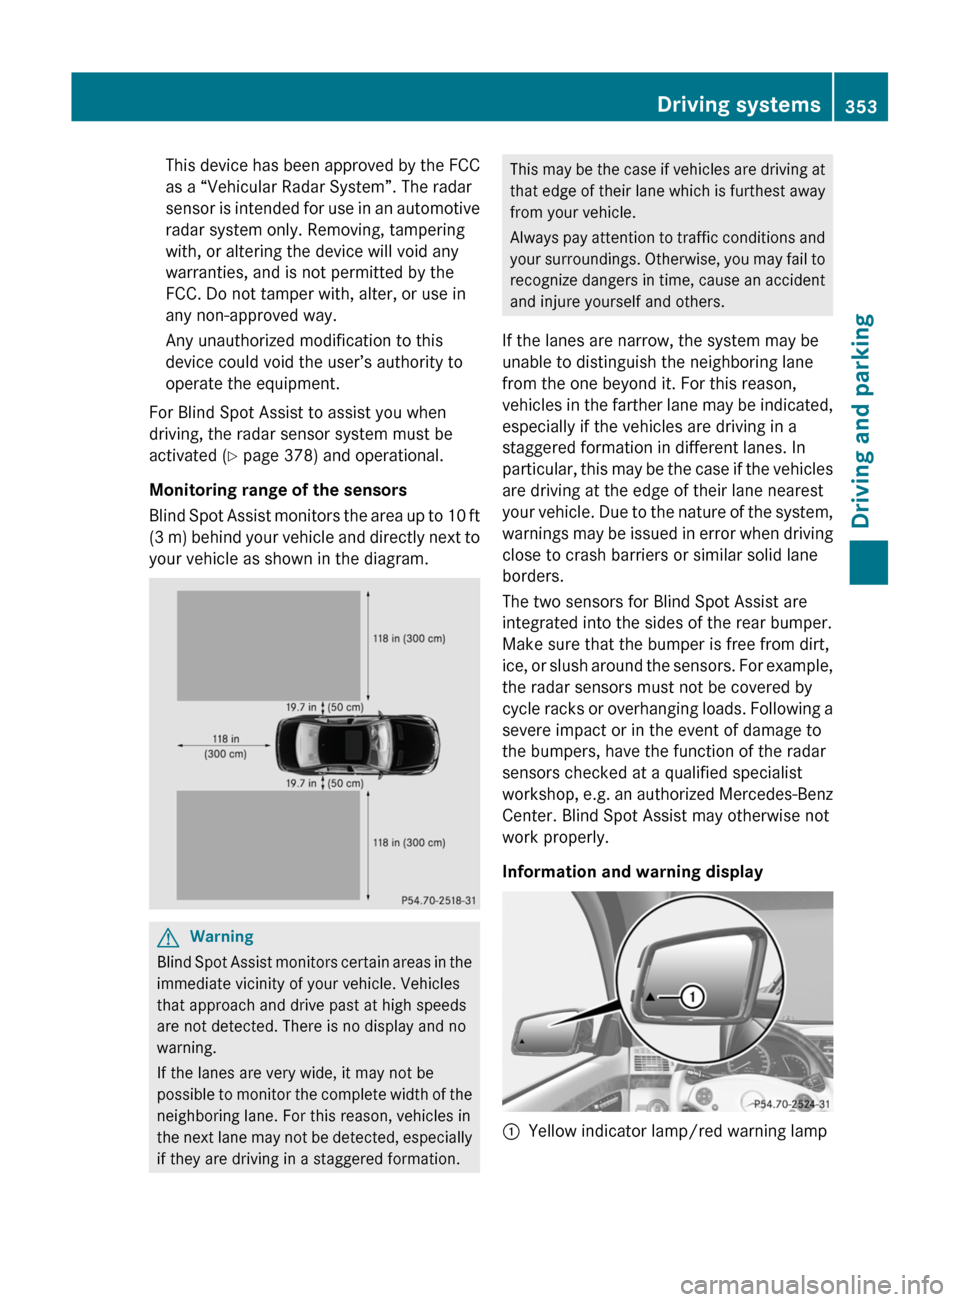 MERCEDES-BENZ S-Class 2011 W221 Owners Manual This device has been approved by the FCC
as a “Vehicular Radar System”. The radar
sensor is intended for use in an automotive
radar system only. Removing, tampering
with, or altering the device wi